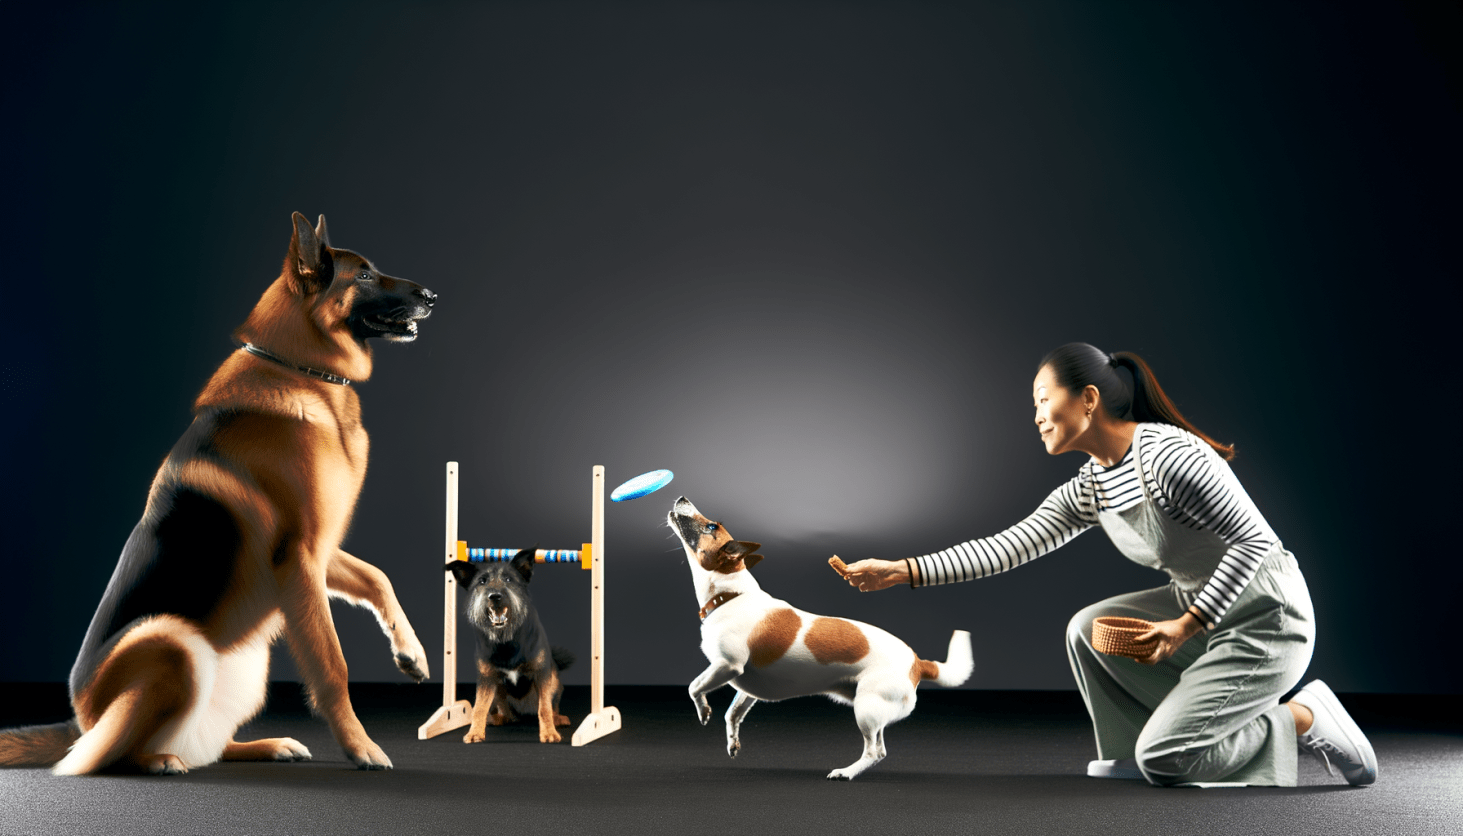 an image showcasing Dog Training Tricks, capturing the essence of a high-quality, professional photograph.